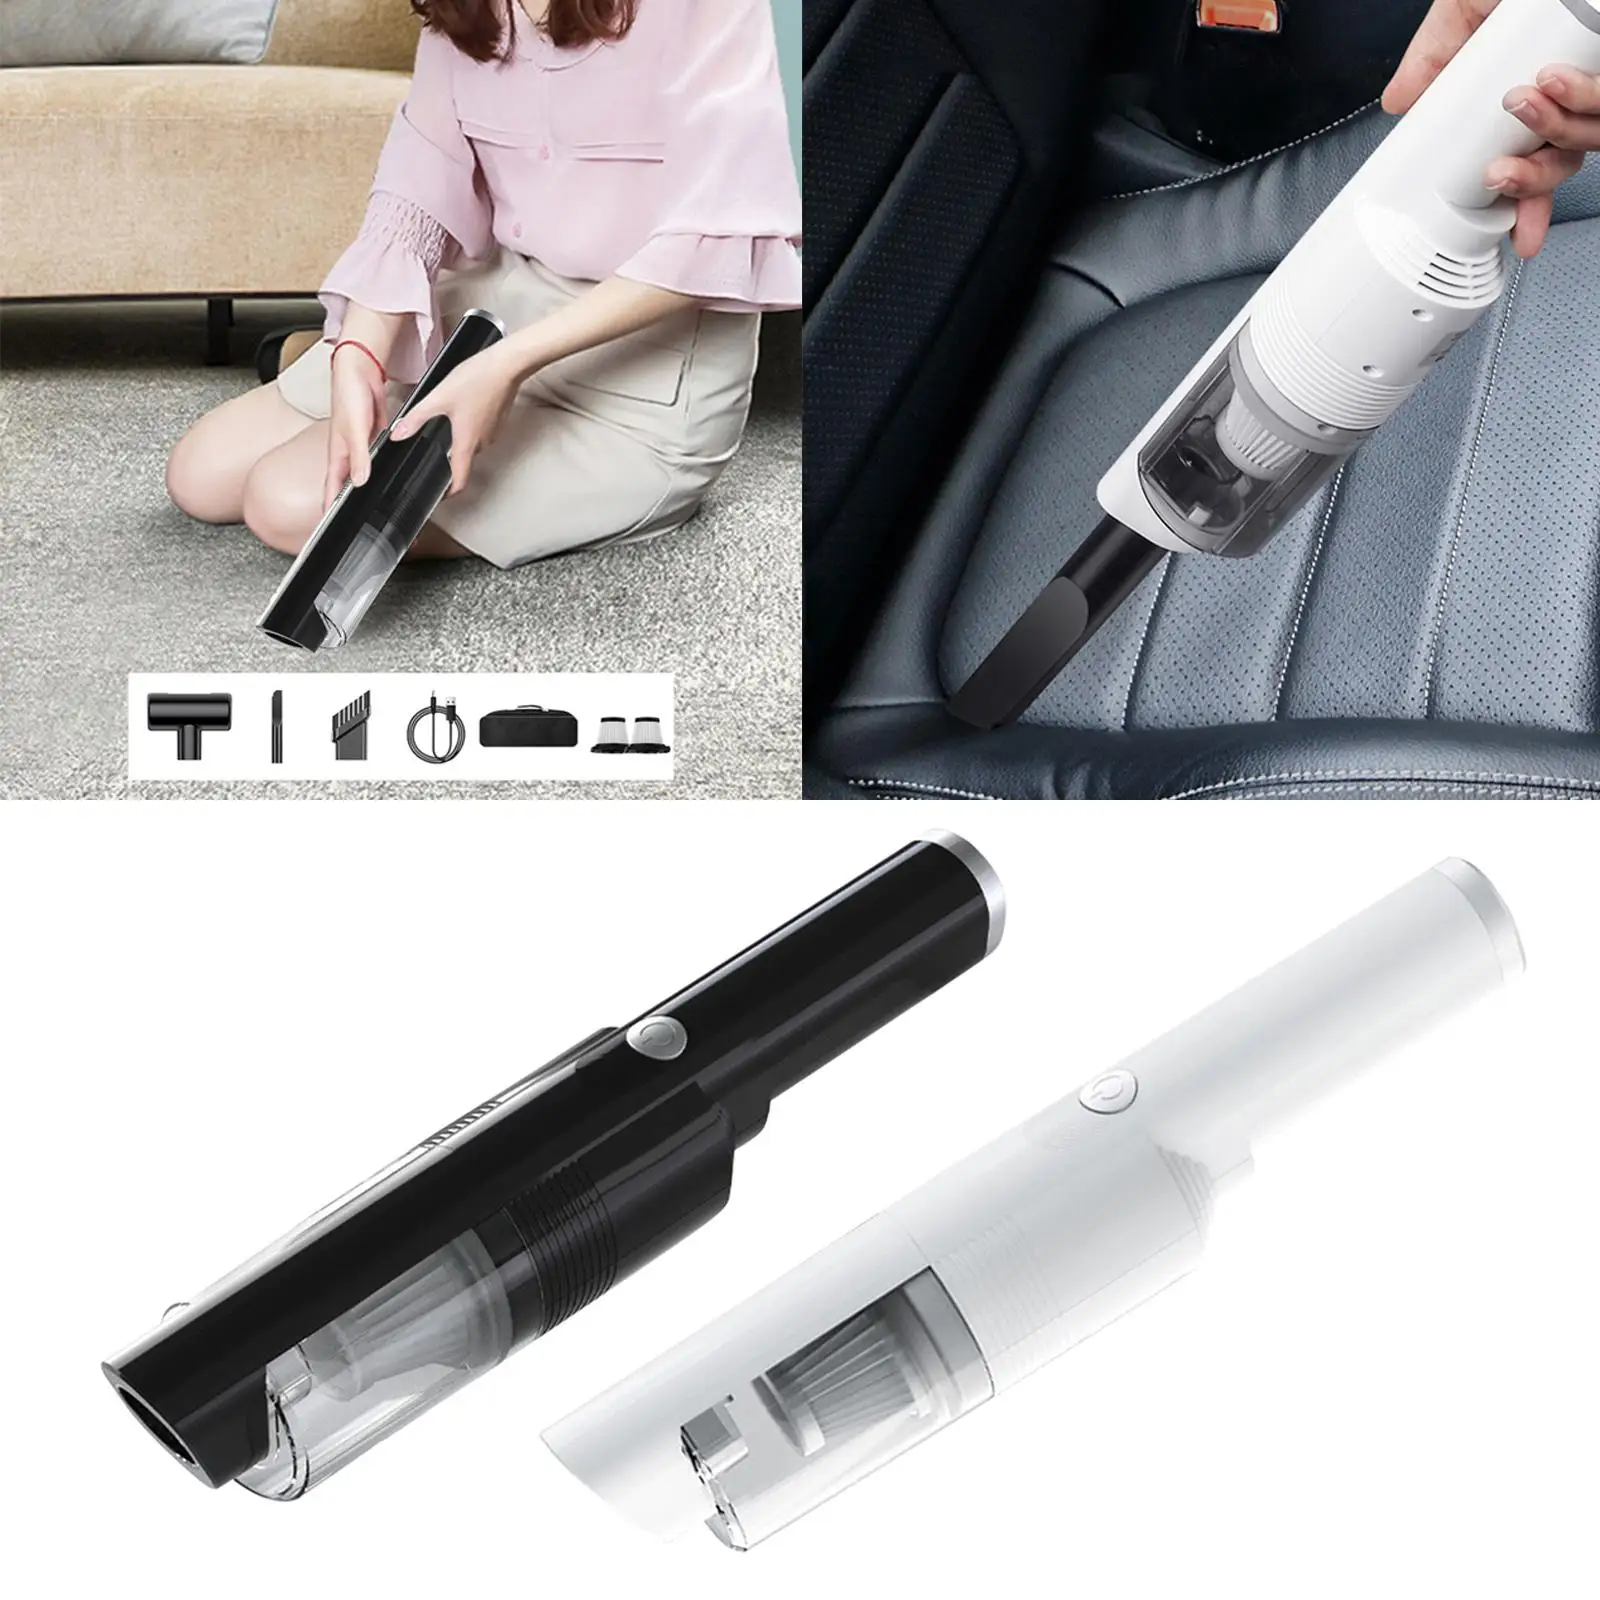 Car Vacuum Cleaner 12000PA 120W Handheld Portable Fit for